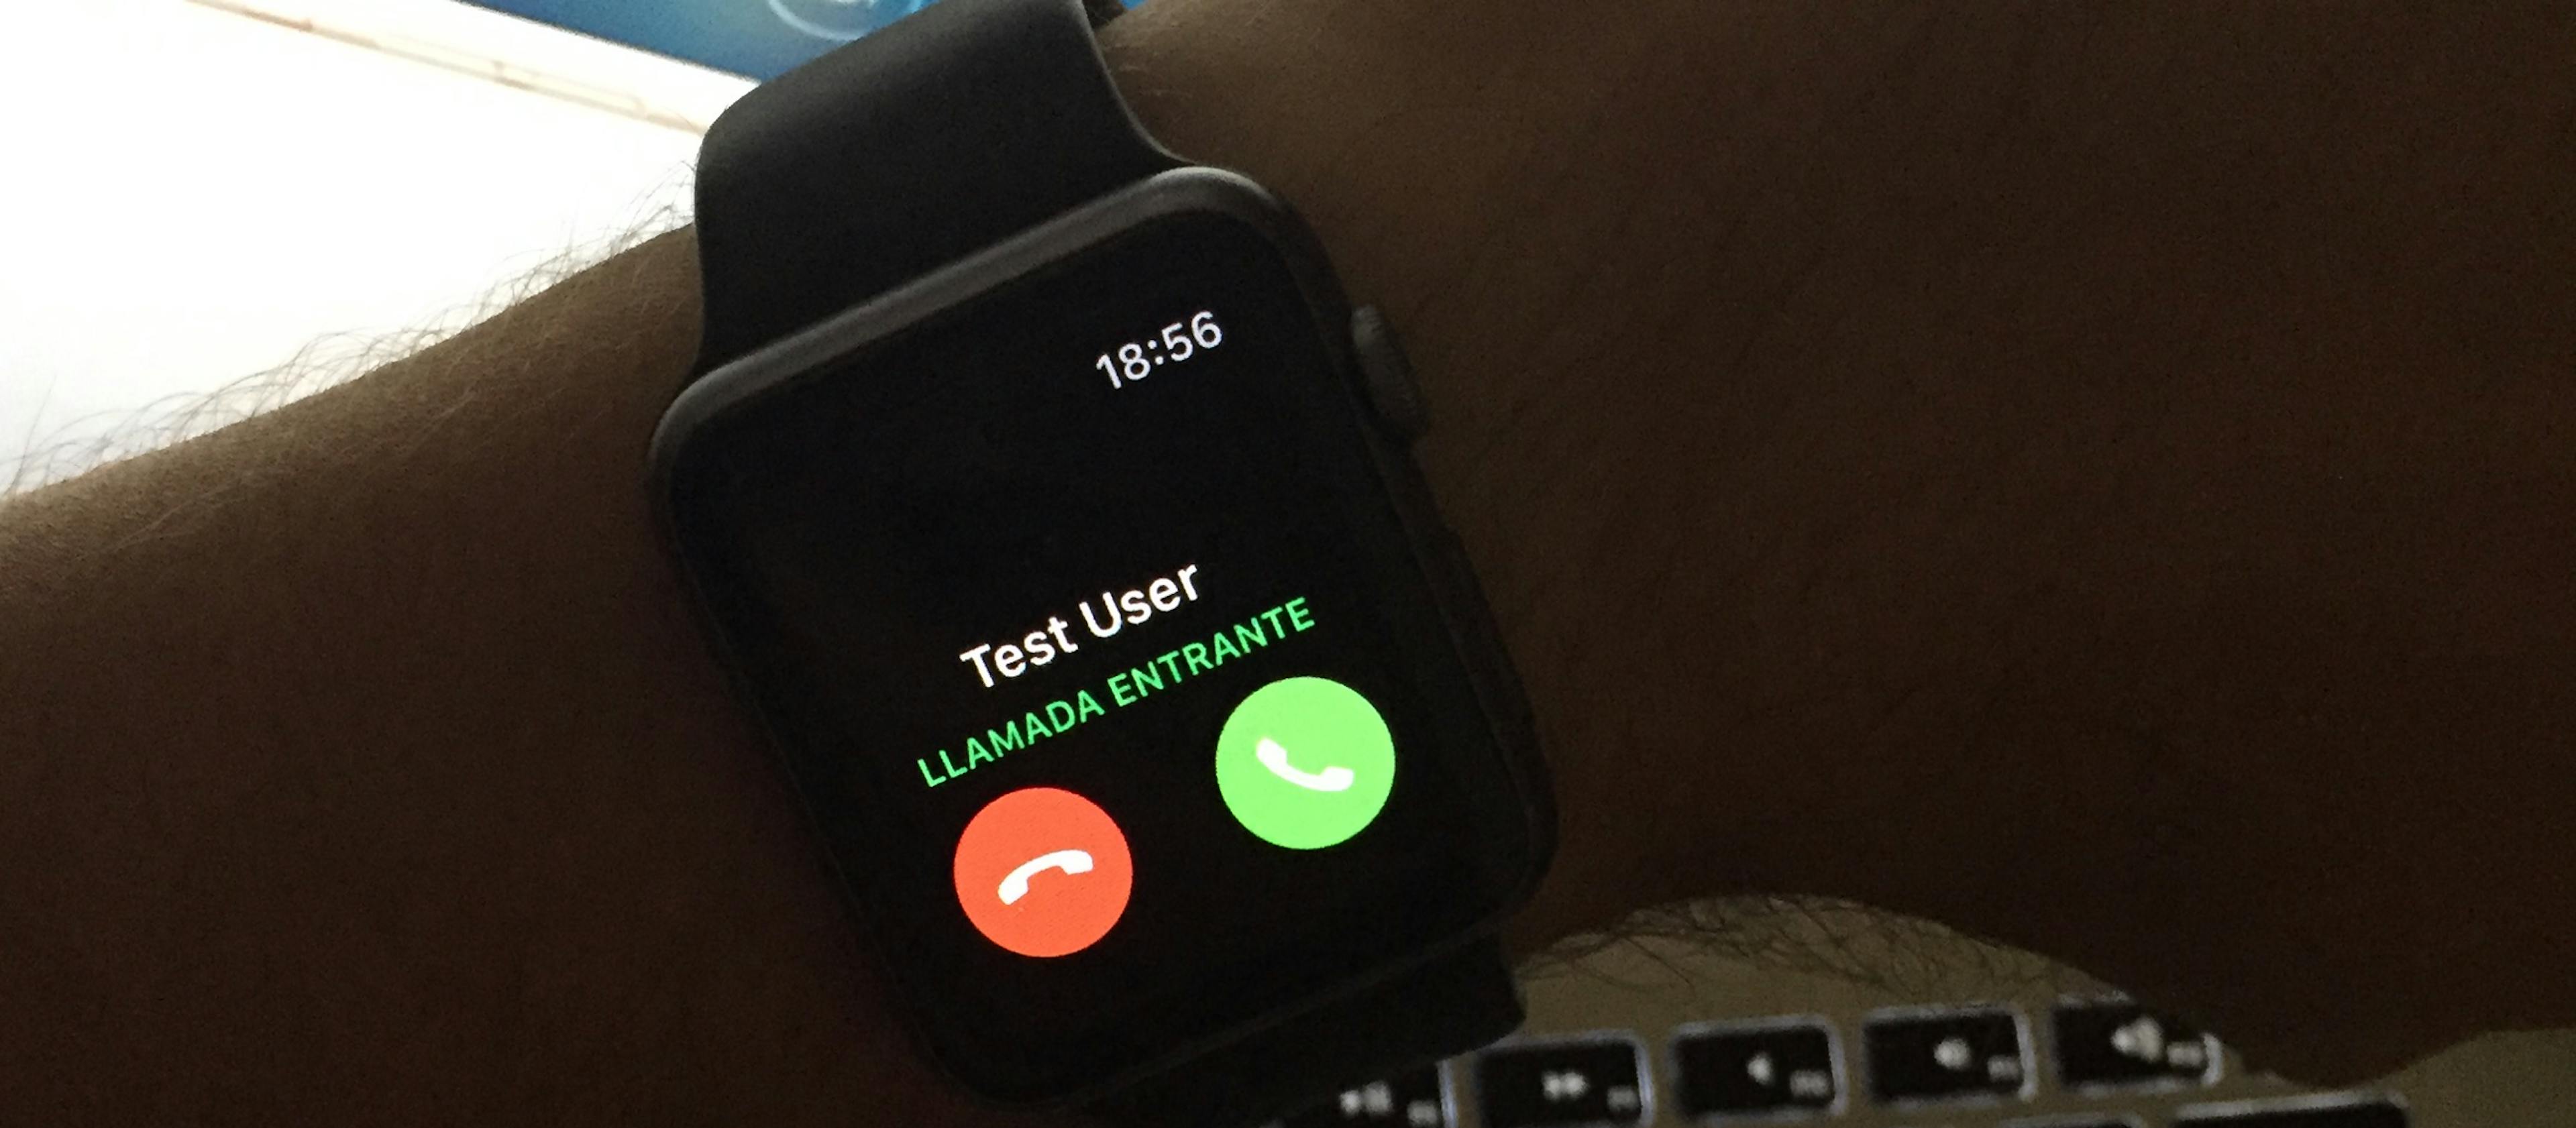 featured image - Why most Apple Watch users will NOT get LTE calls on it (and why some will).